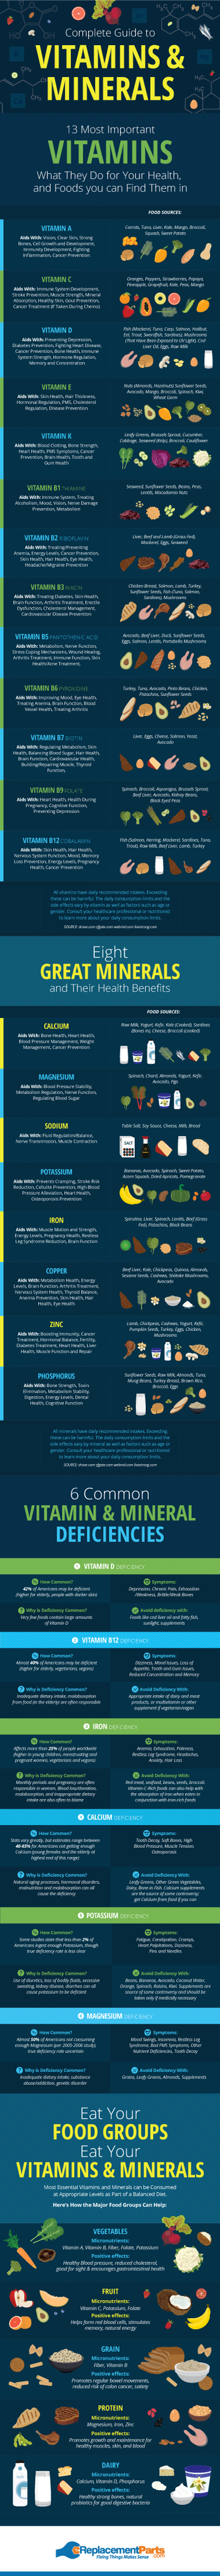 Guide to Vitamins and Minerals